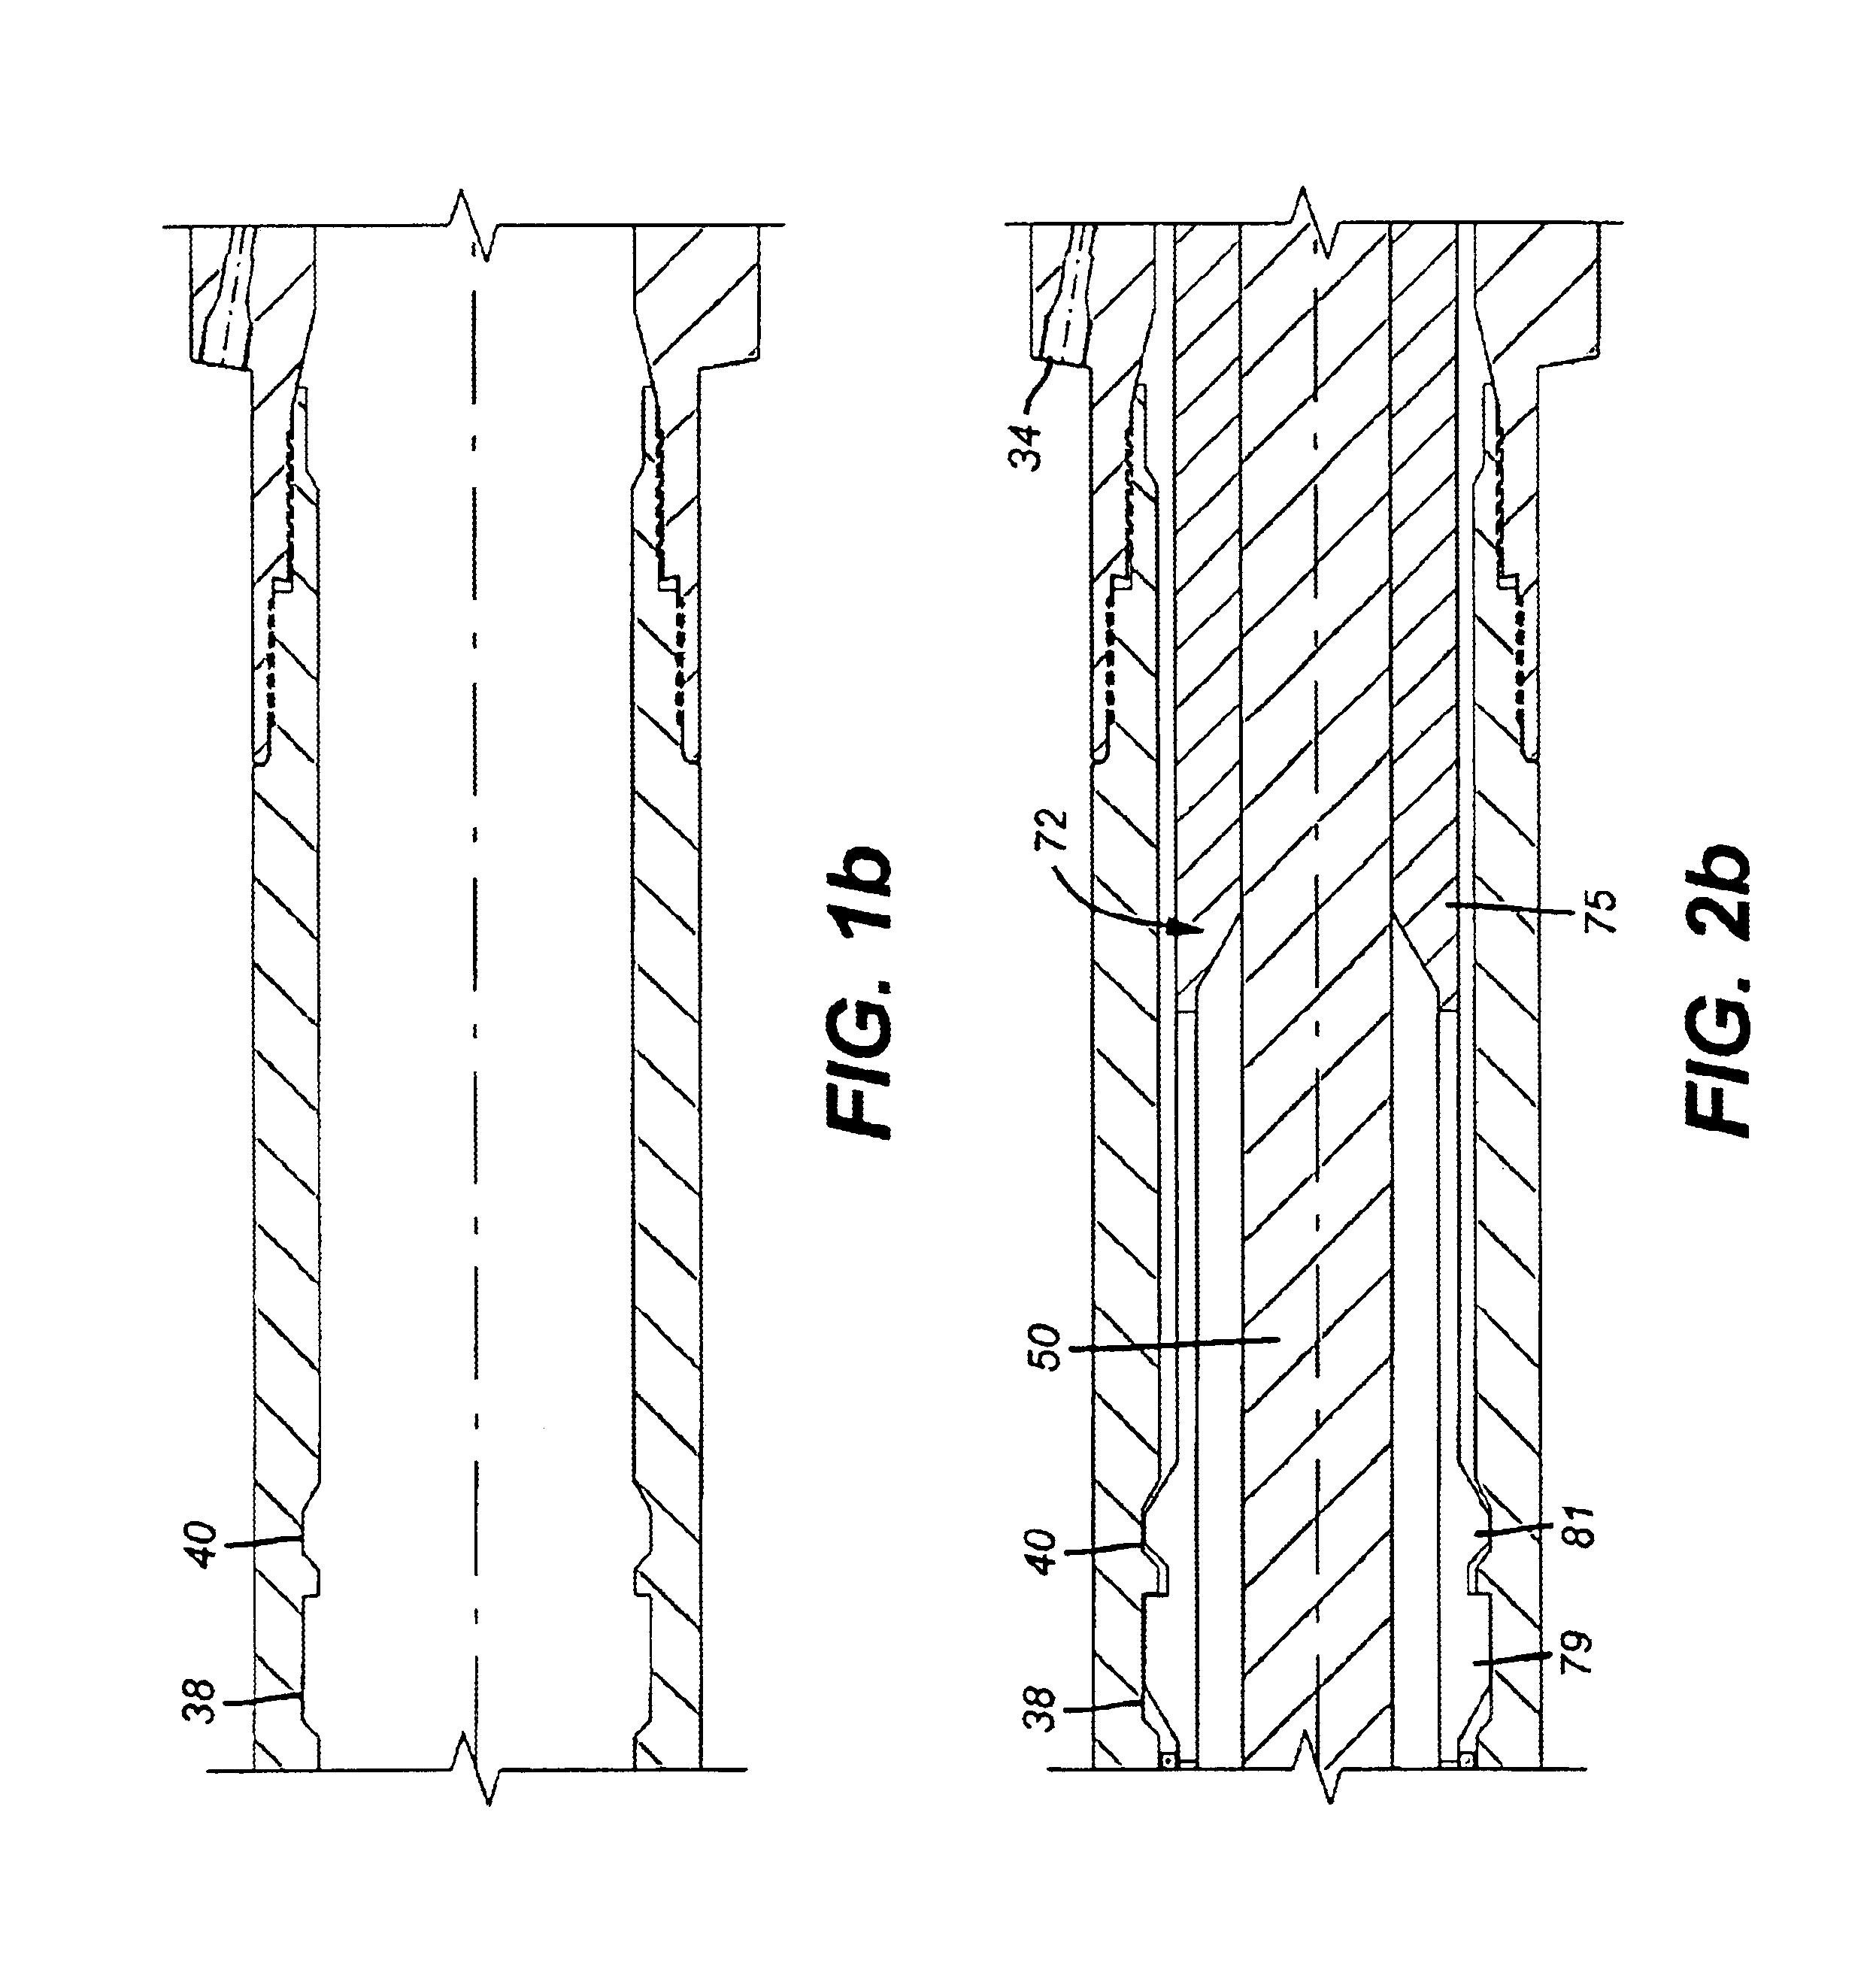 Lock open and control system access apparatus and method for a downhole safety valve